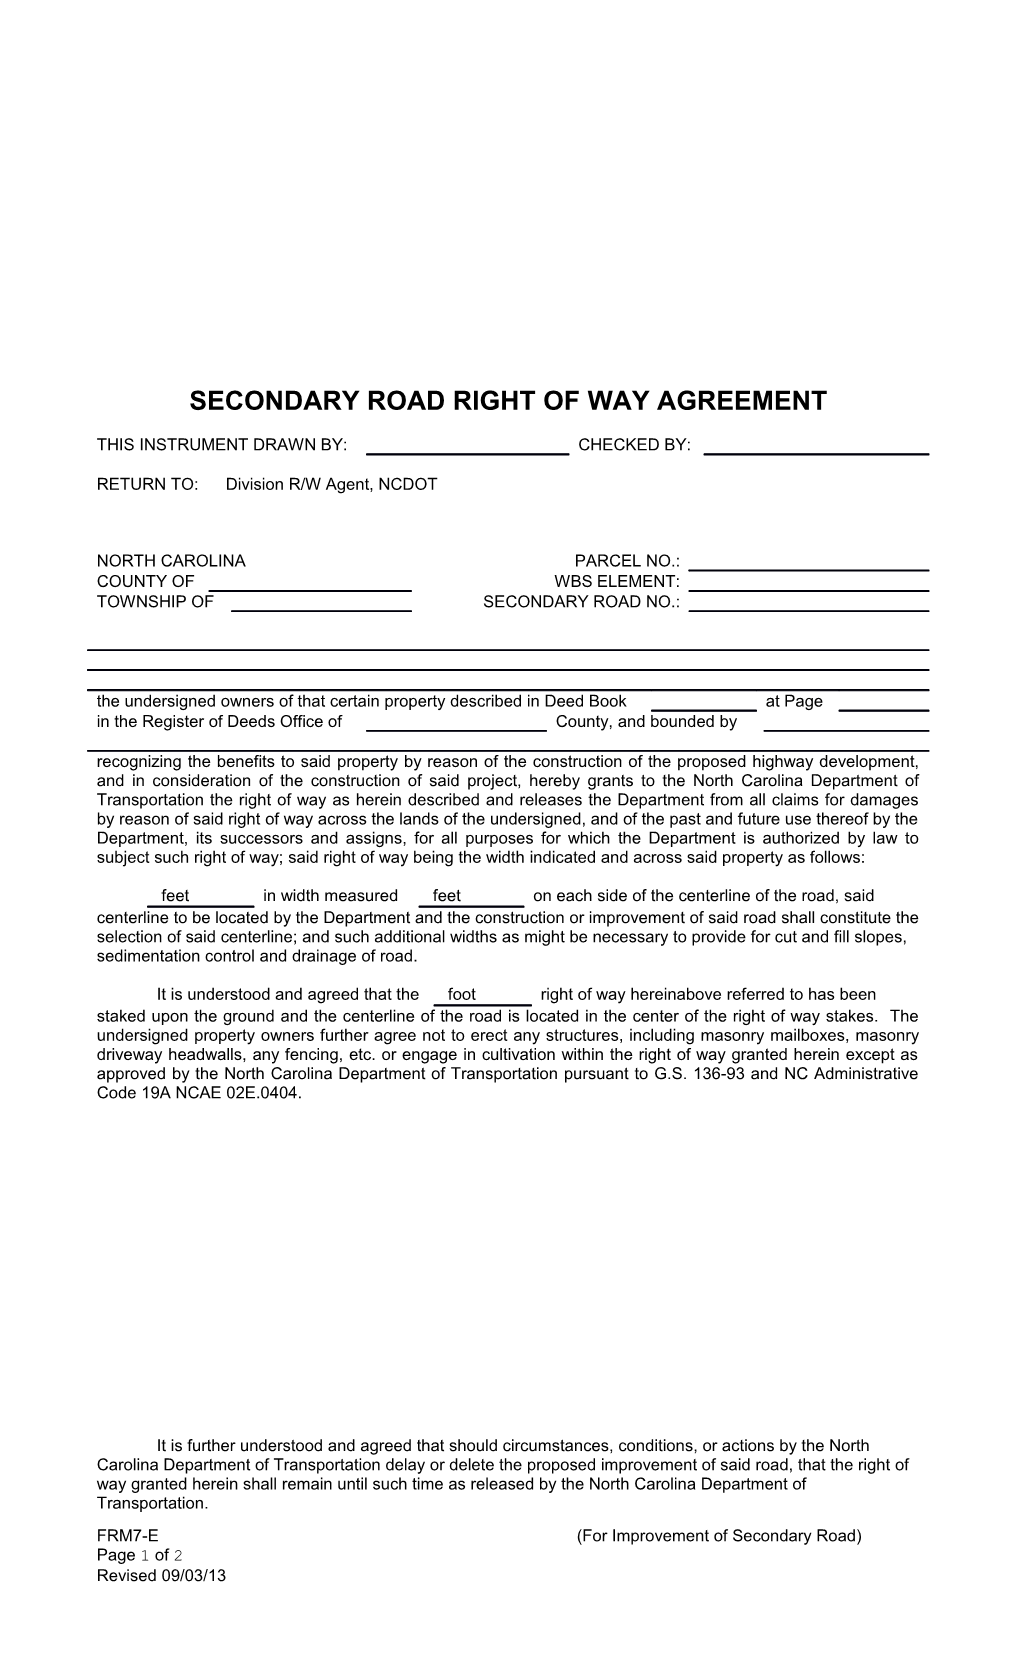 Secondary Road Right of Way Agreement (For Improvement of Secondary Road)